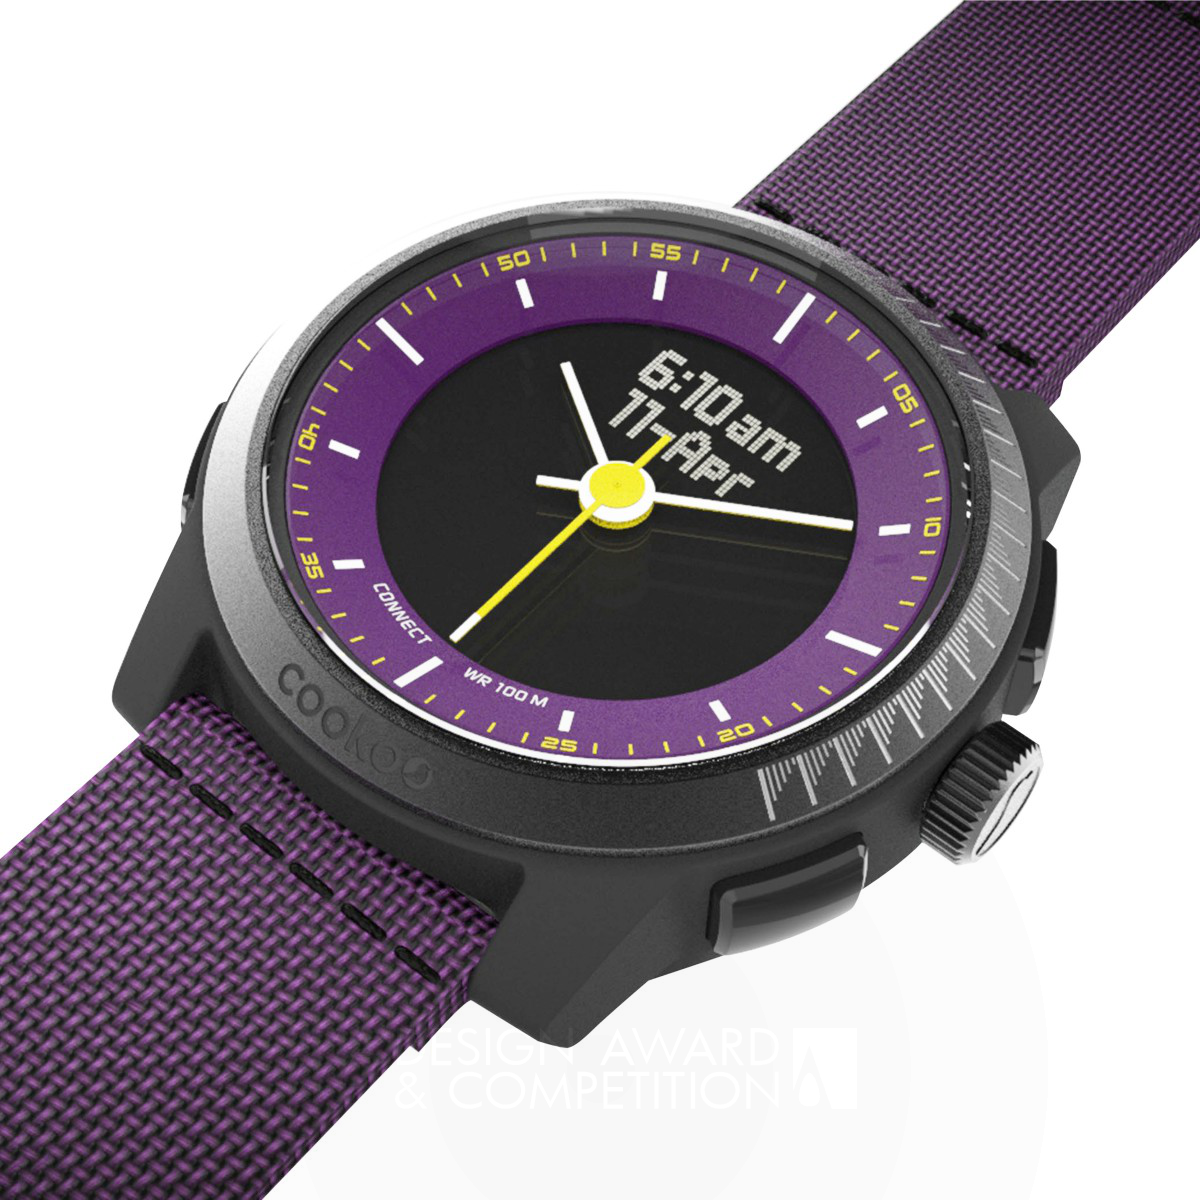 COOKOO 2.0 Bluetooth Connected Watch by CONNECTEDEVICE Ltd